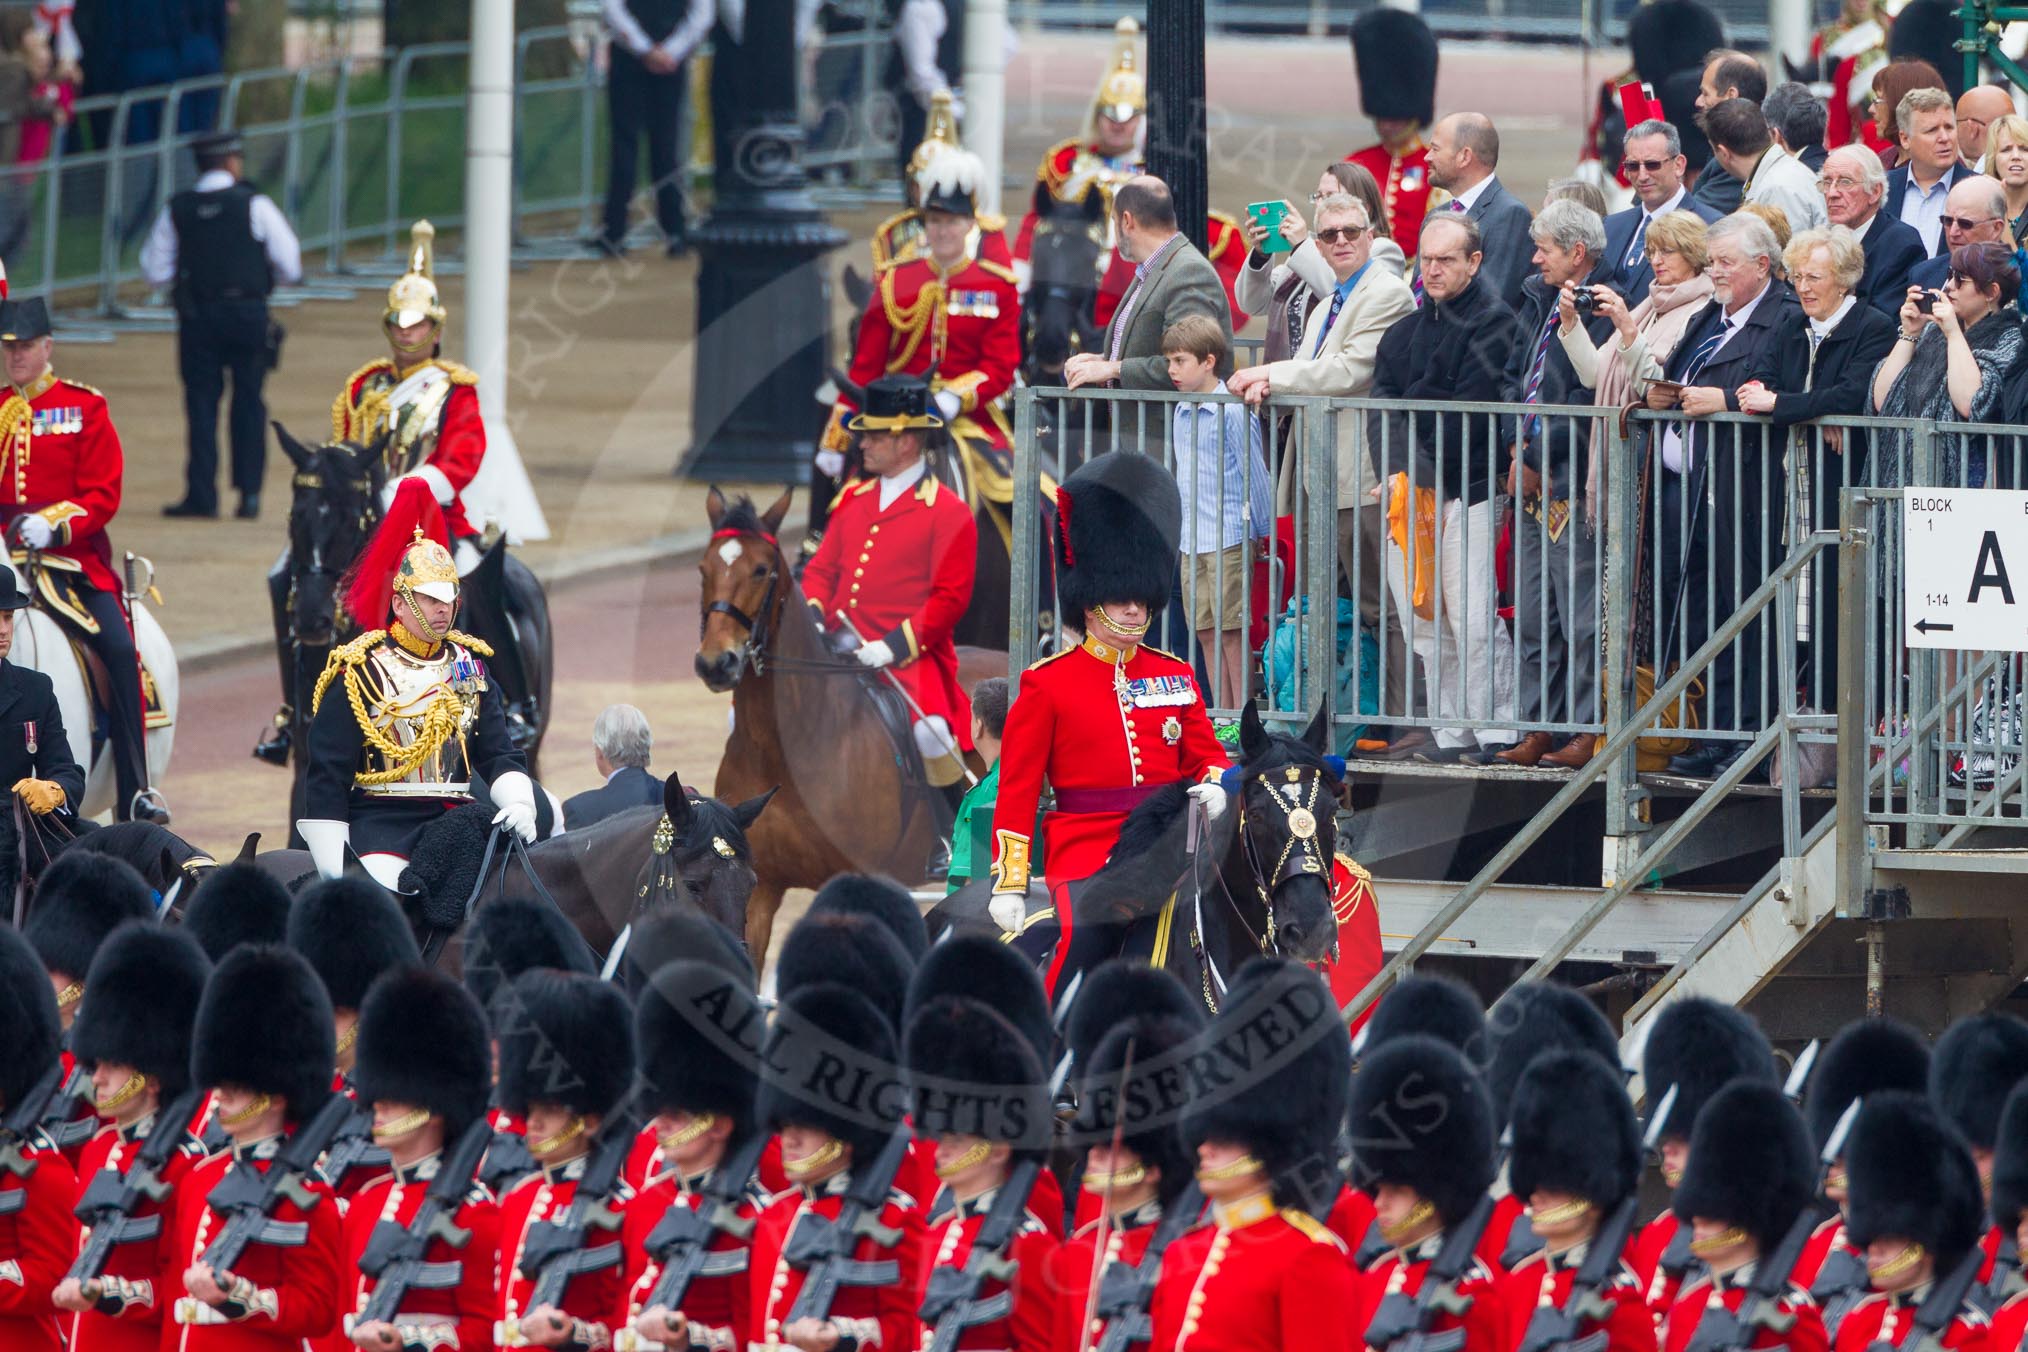 The Colonel's Review 2016.
Horse Guards Parade, Westminster,
London,

United Kingdom,
on 04 June 2016 at 10:58, image #155